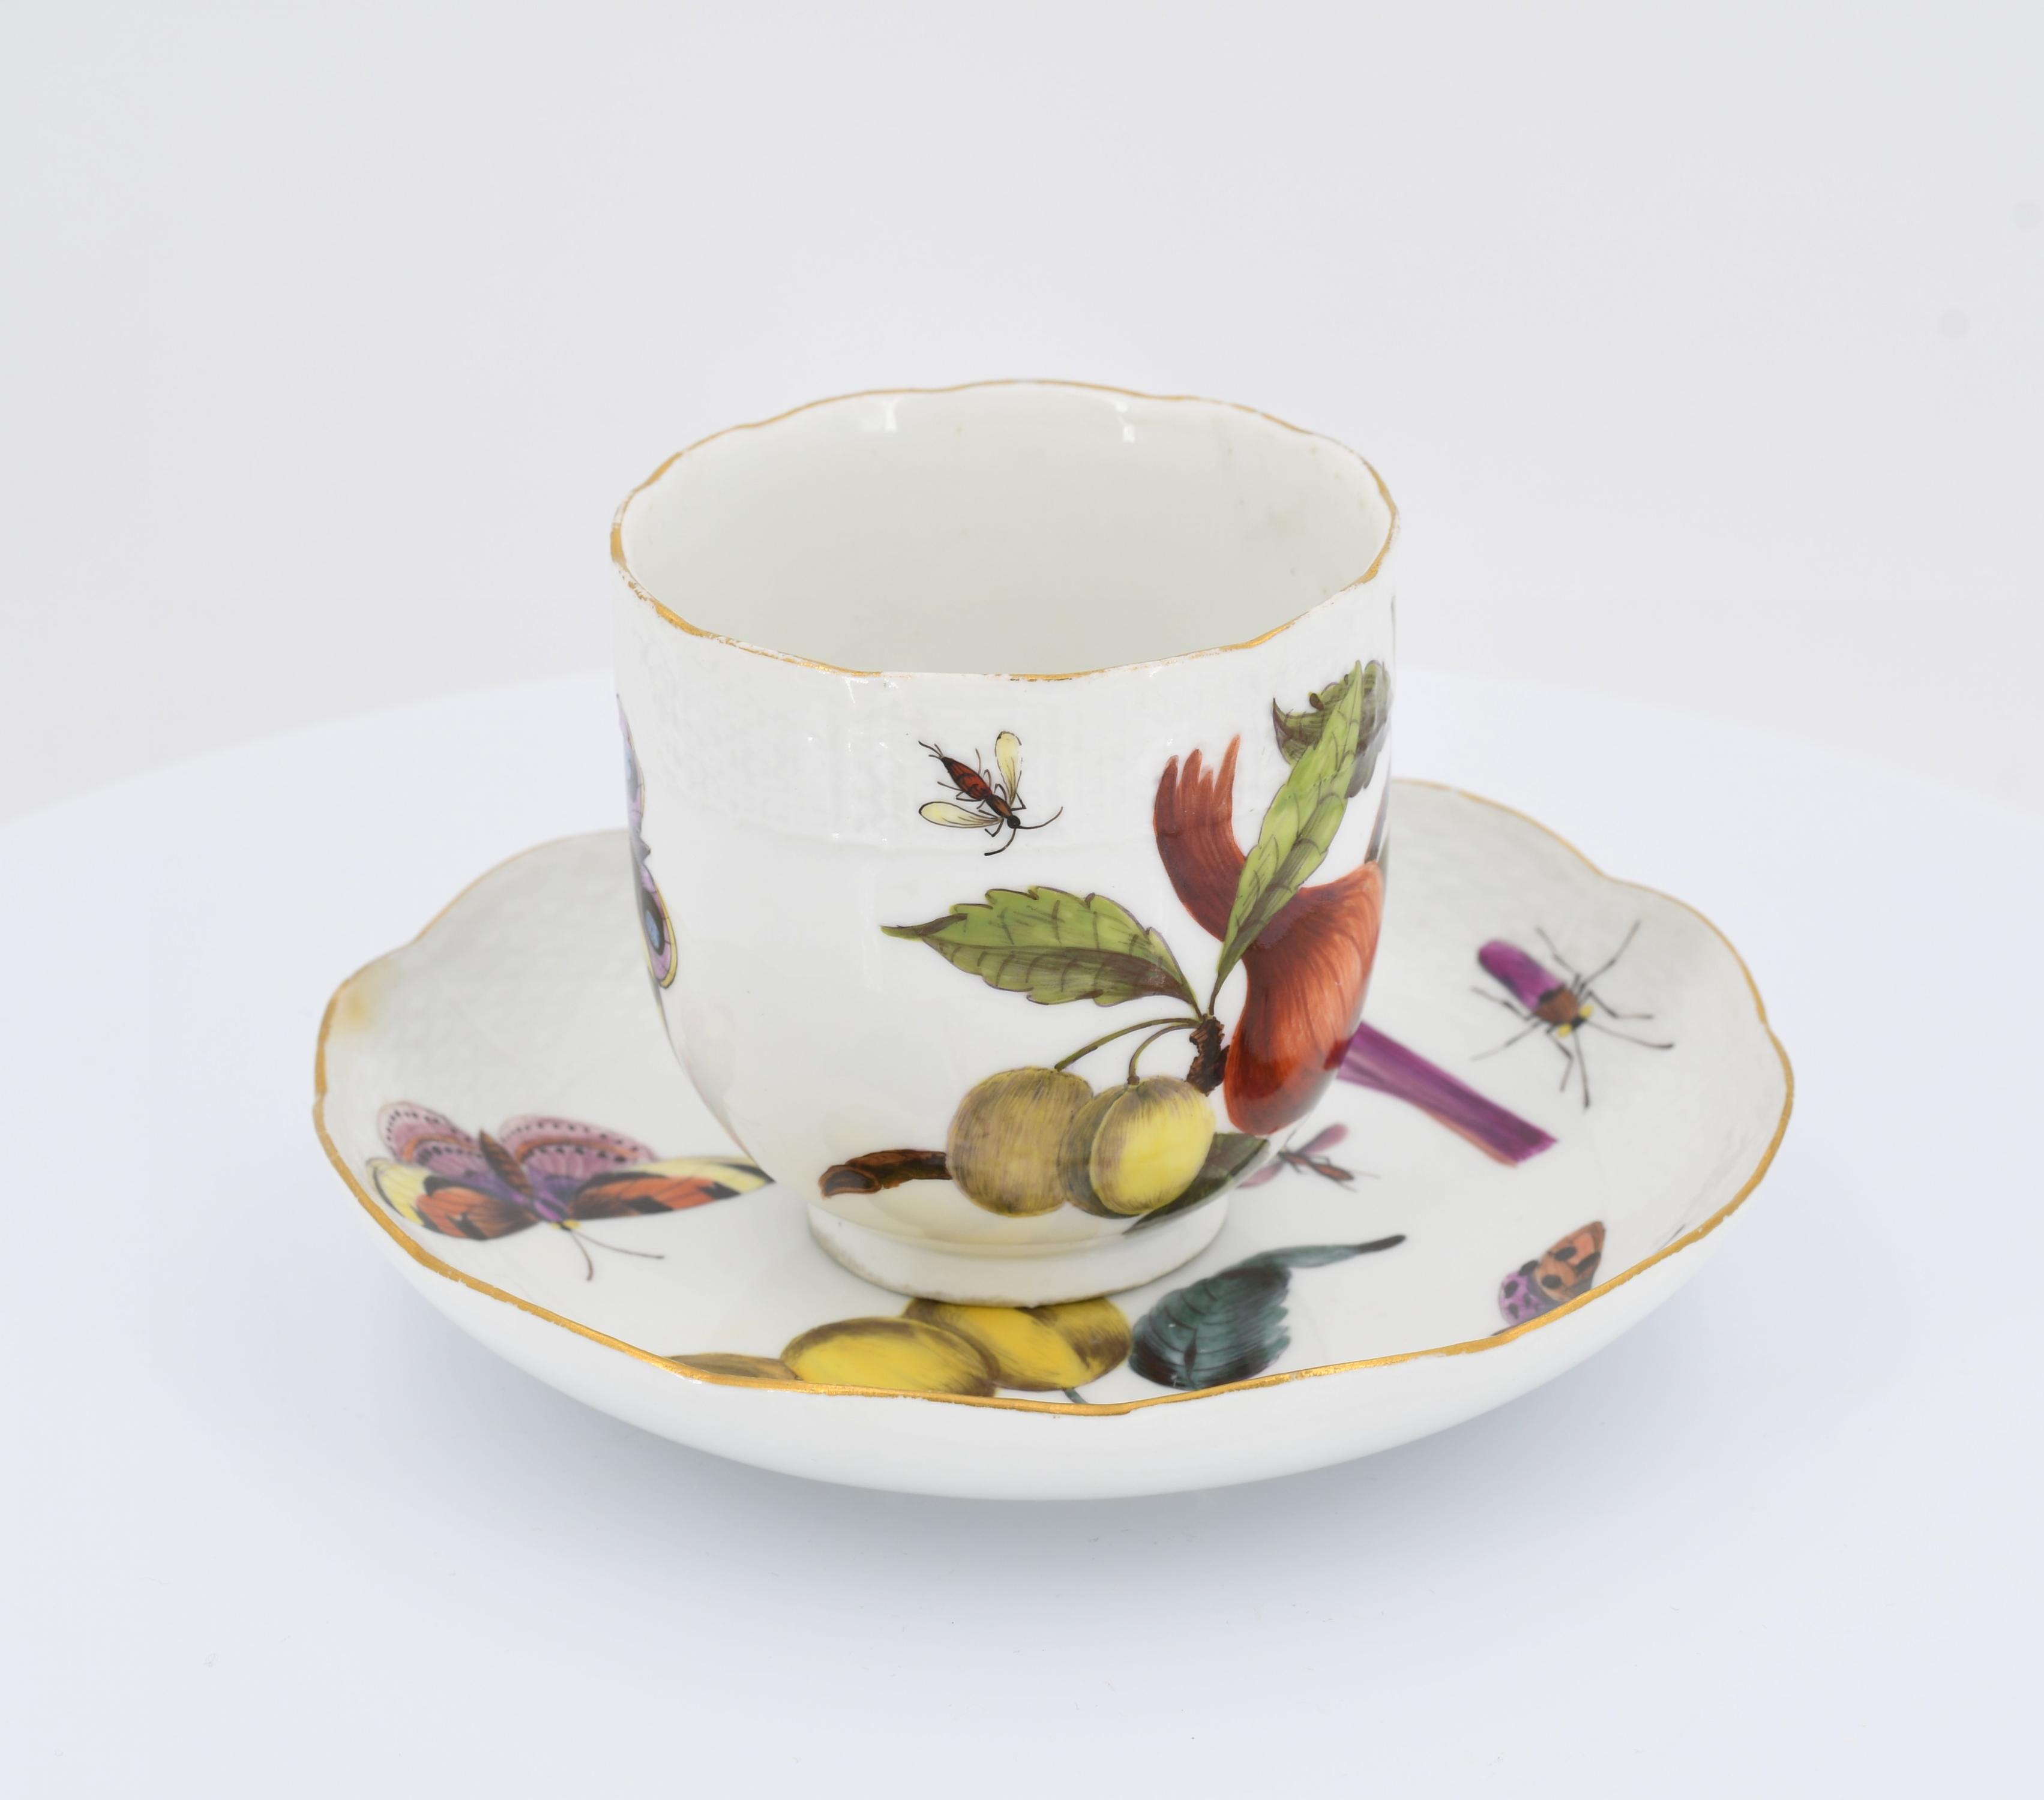 Cup and saucer with fruits and insects - Image 5 of 7